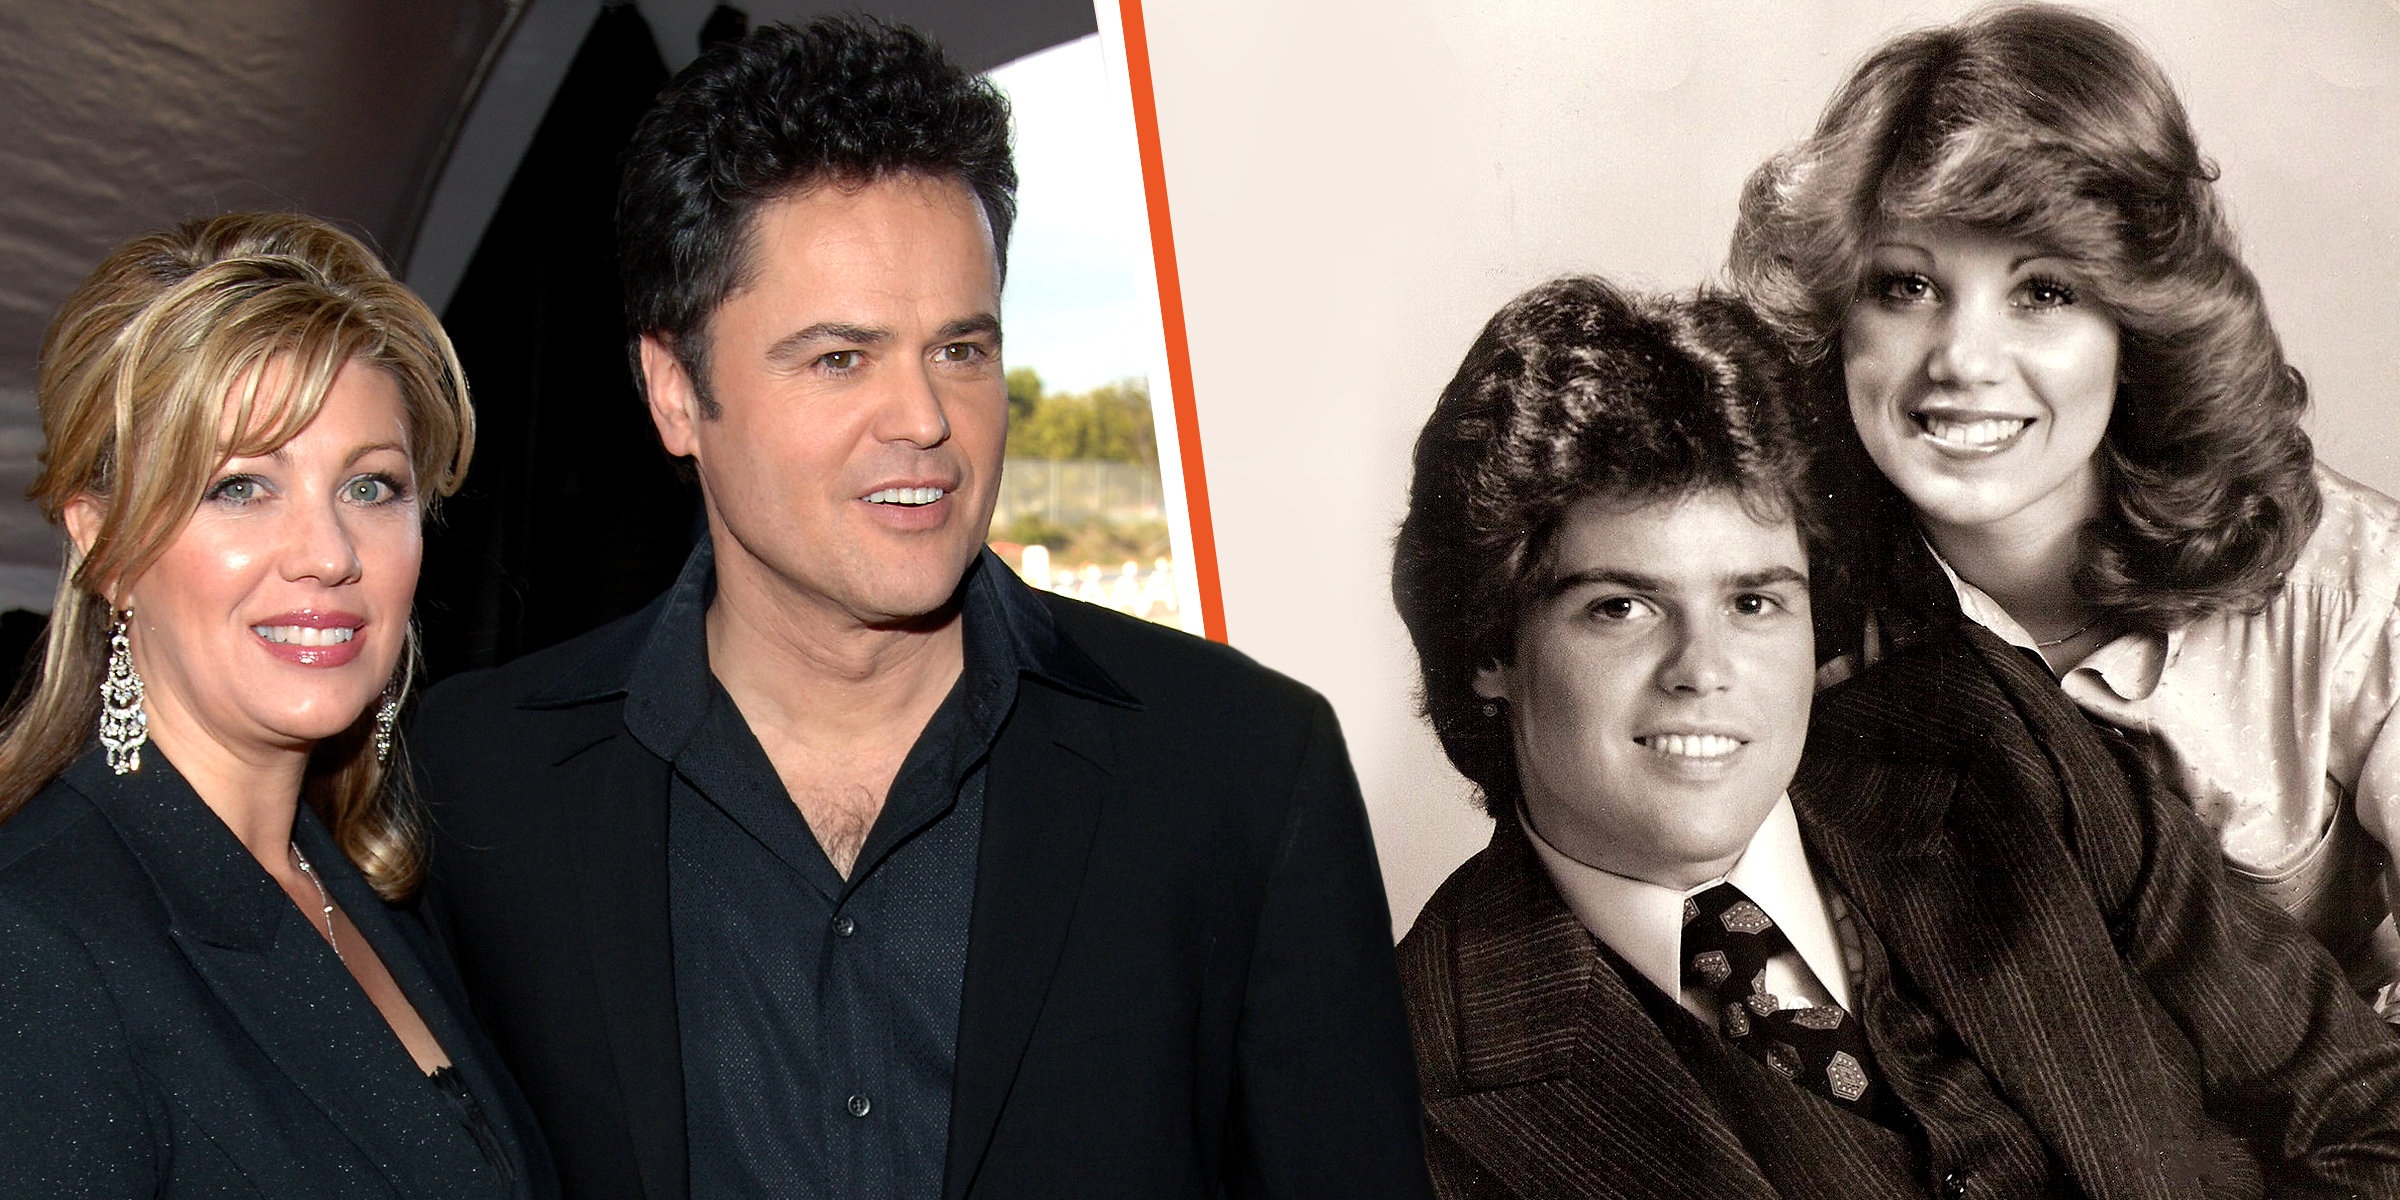 Donny Osmond and Wife Debbie | Young Donny Osmond and Wife Debbie | Source: Getty Images | https://www.instagram.com/donnyosmond/